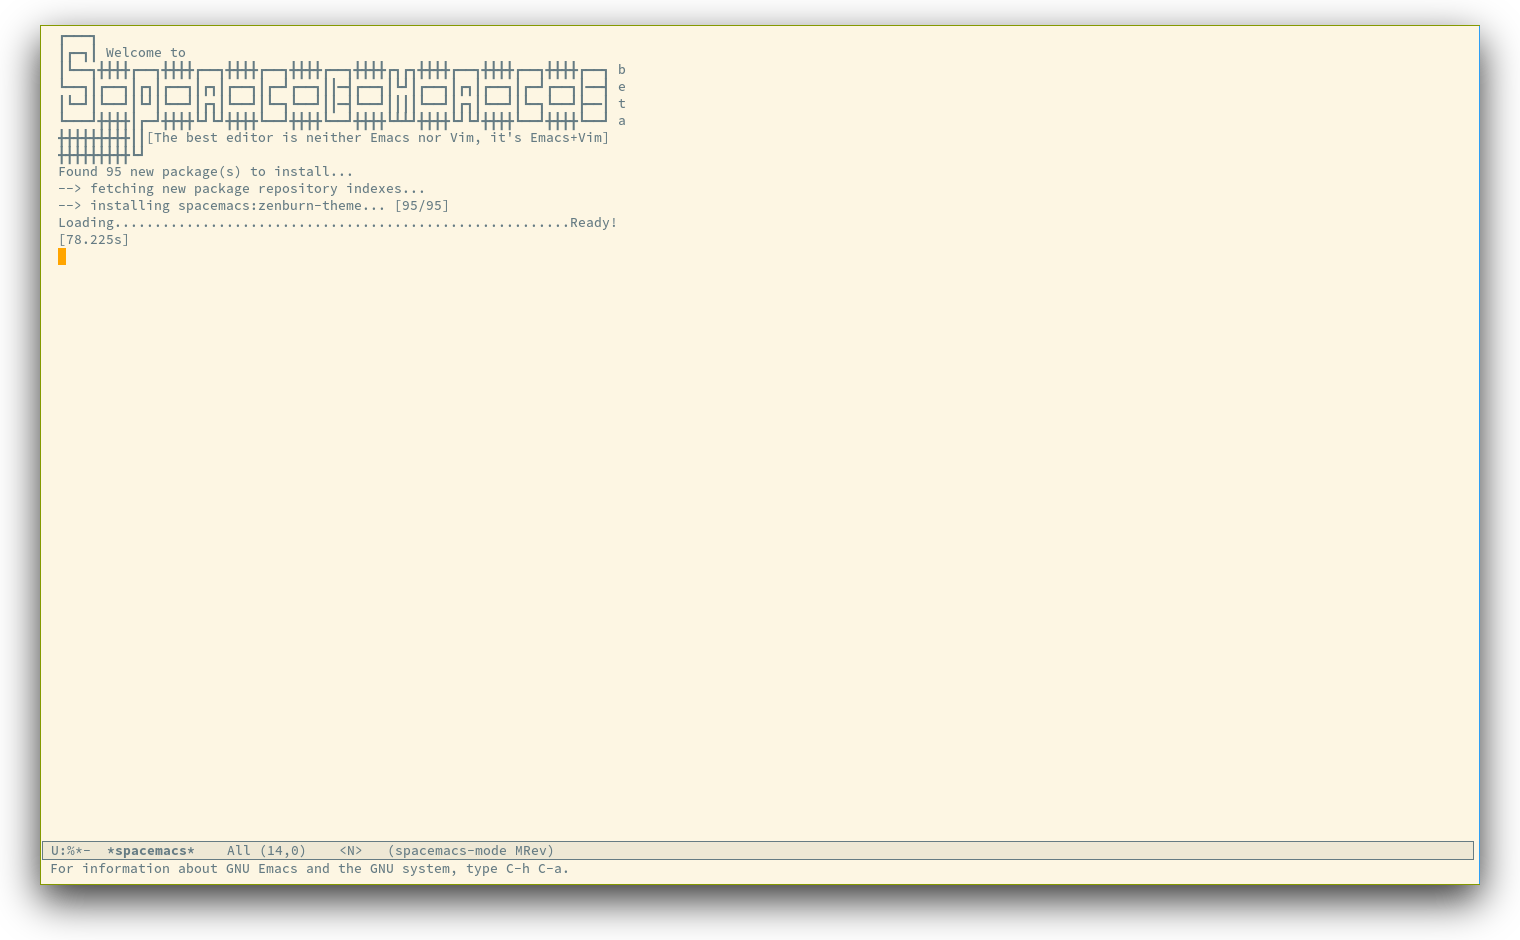 /TakeV/spacemacs/media/commit/471fce610617776961b637169776ec08802558b7/doc/img/spacemacs-startup.png